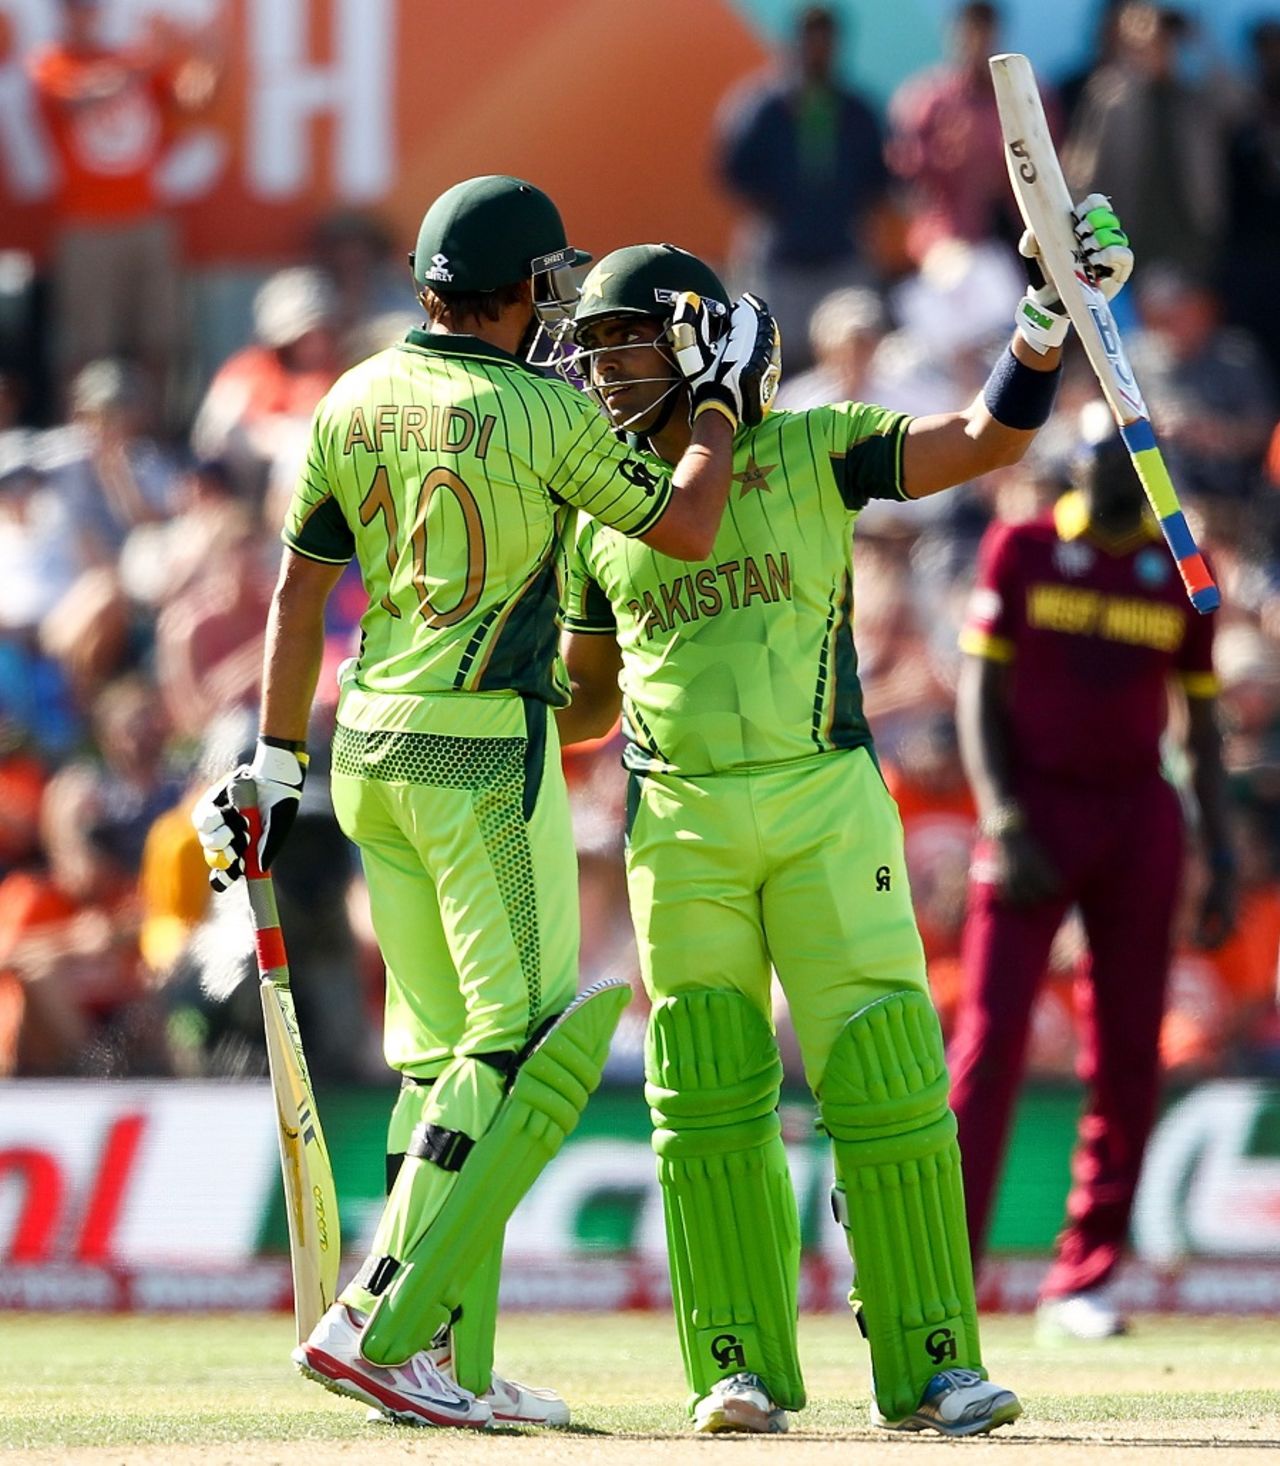 Shahid Afridi congratulates Umar Akmal on the latter's fifty, Pakistan v West Indies, World Cup 2015, Group B, Christchurch, February 21, 2015